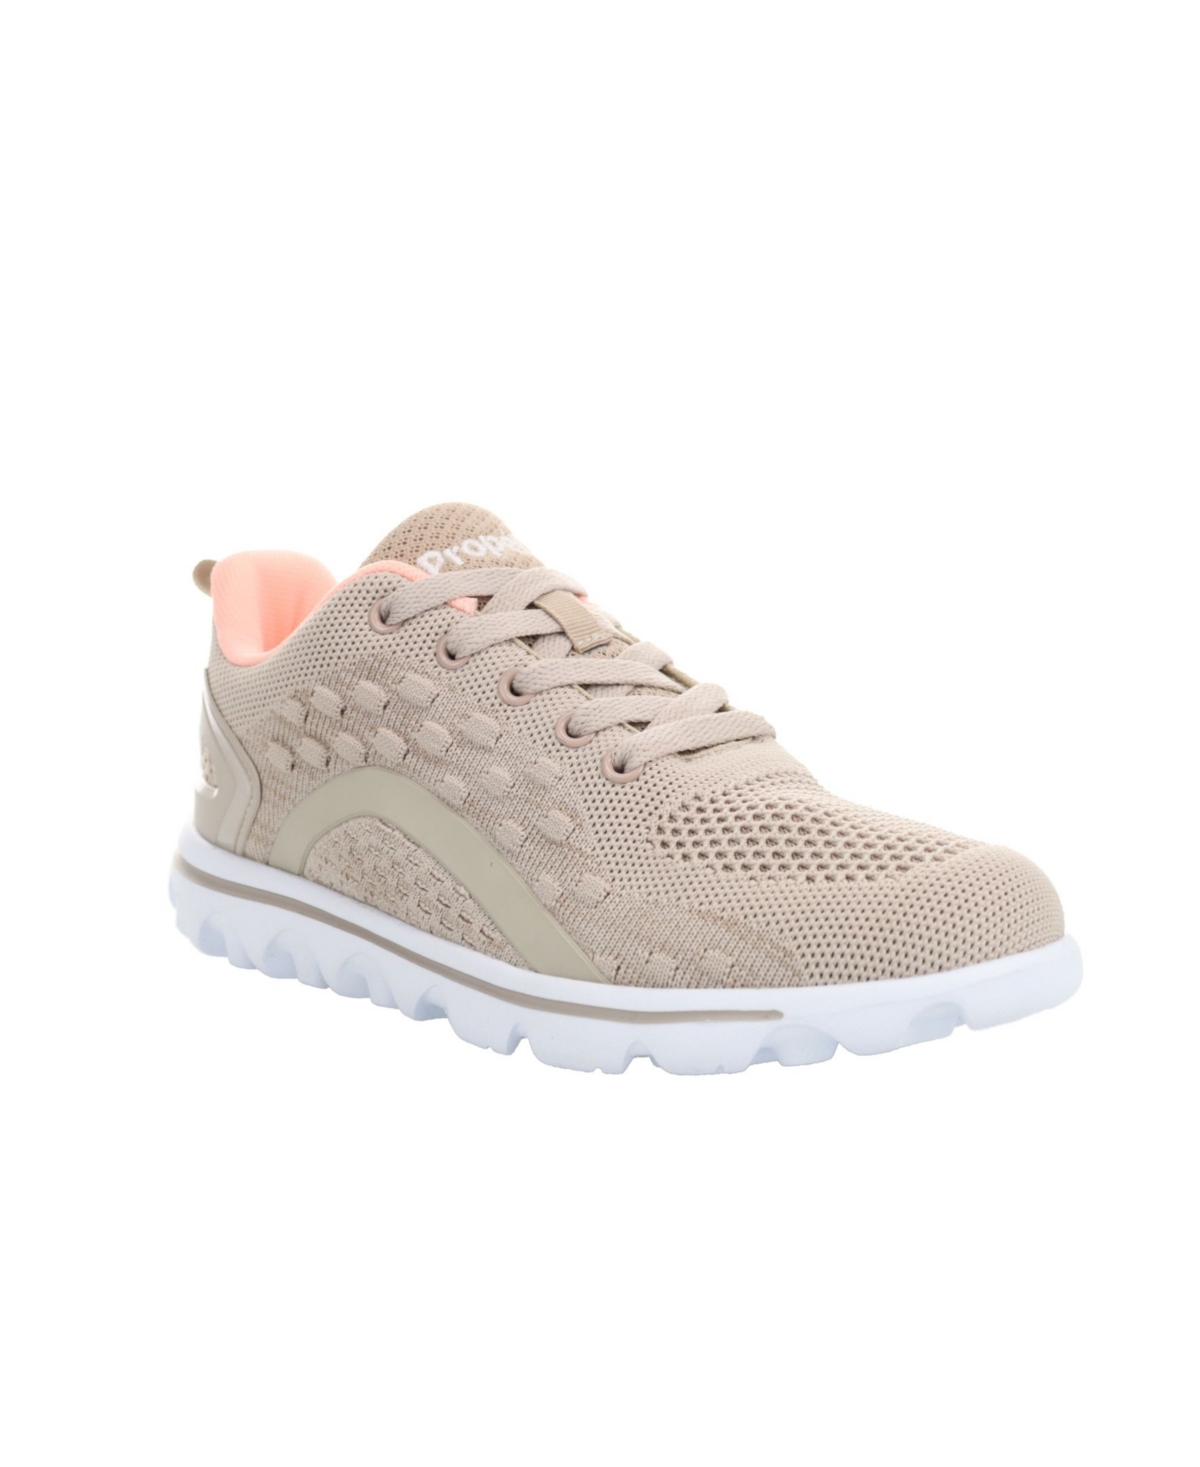 Women's Travelactiv Axial Sneakers - Taupe, Peach